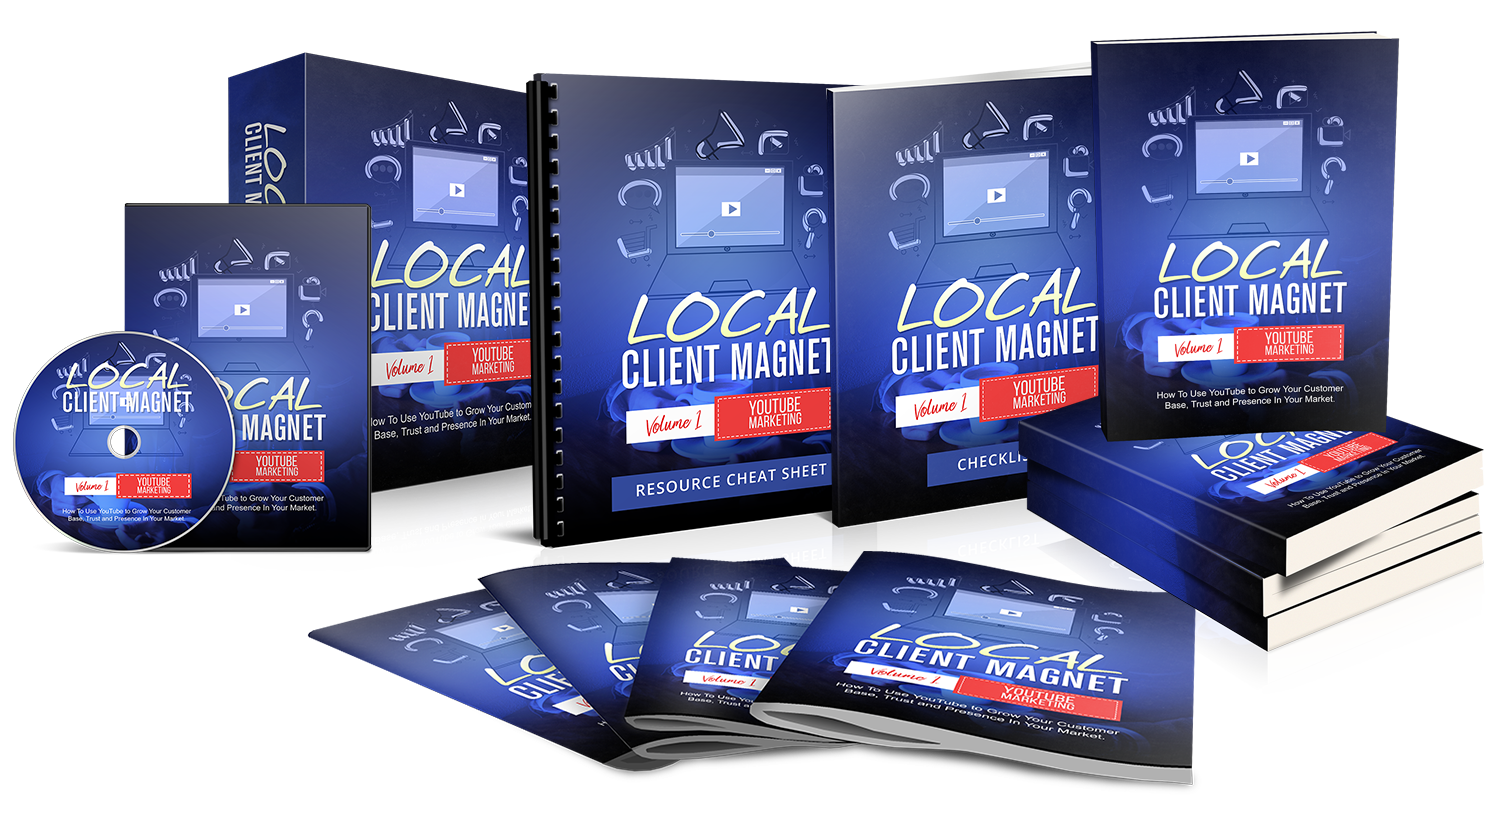 Local Client Magnet Volume 1 YouTube Marketing Local Client Magnet Volume 1 YouTube Marketing